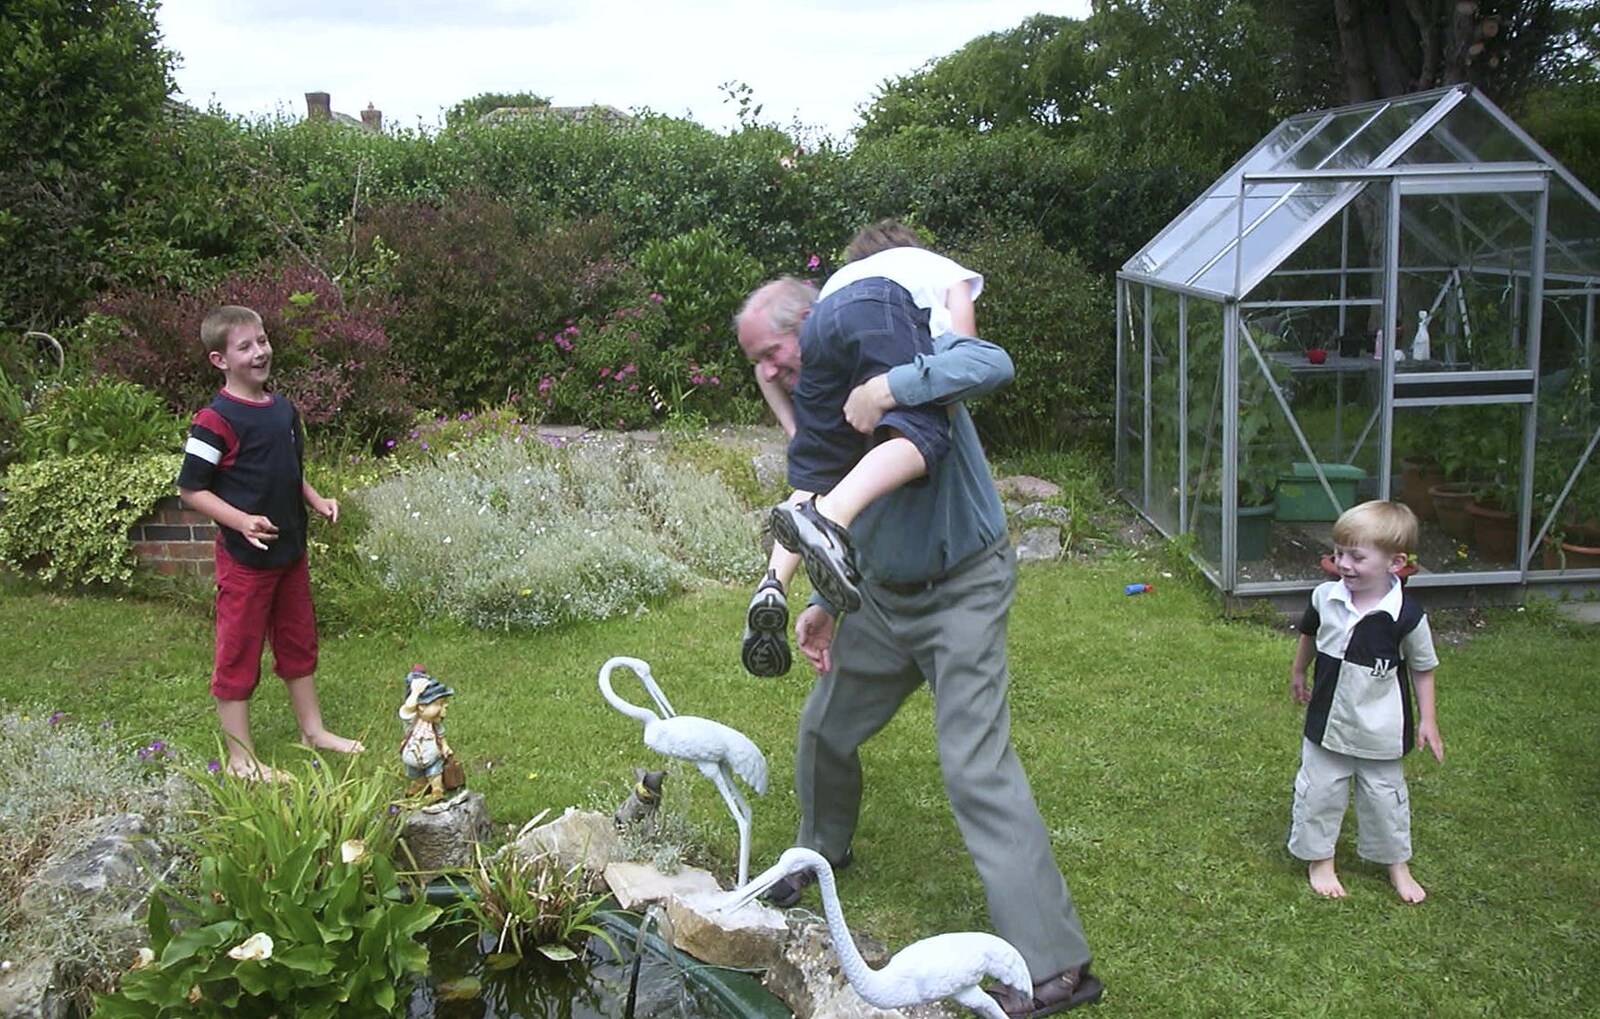 Bob is the expert child-tormentor from Sydney's Christening, Hordle, Hampshire - 4th May 2002